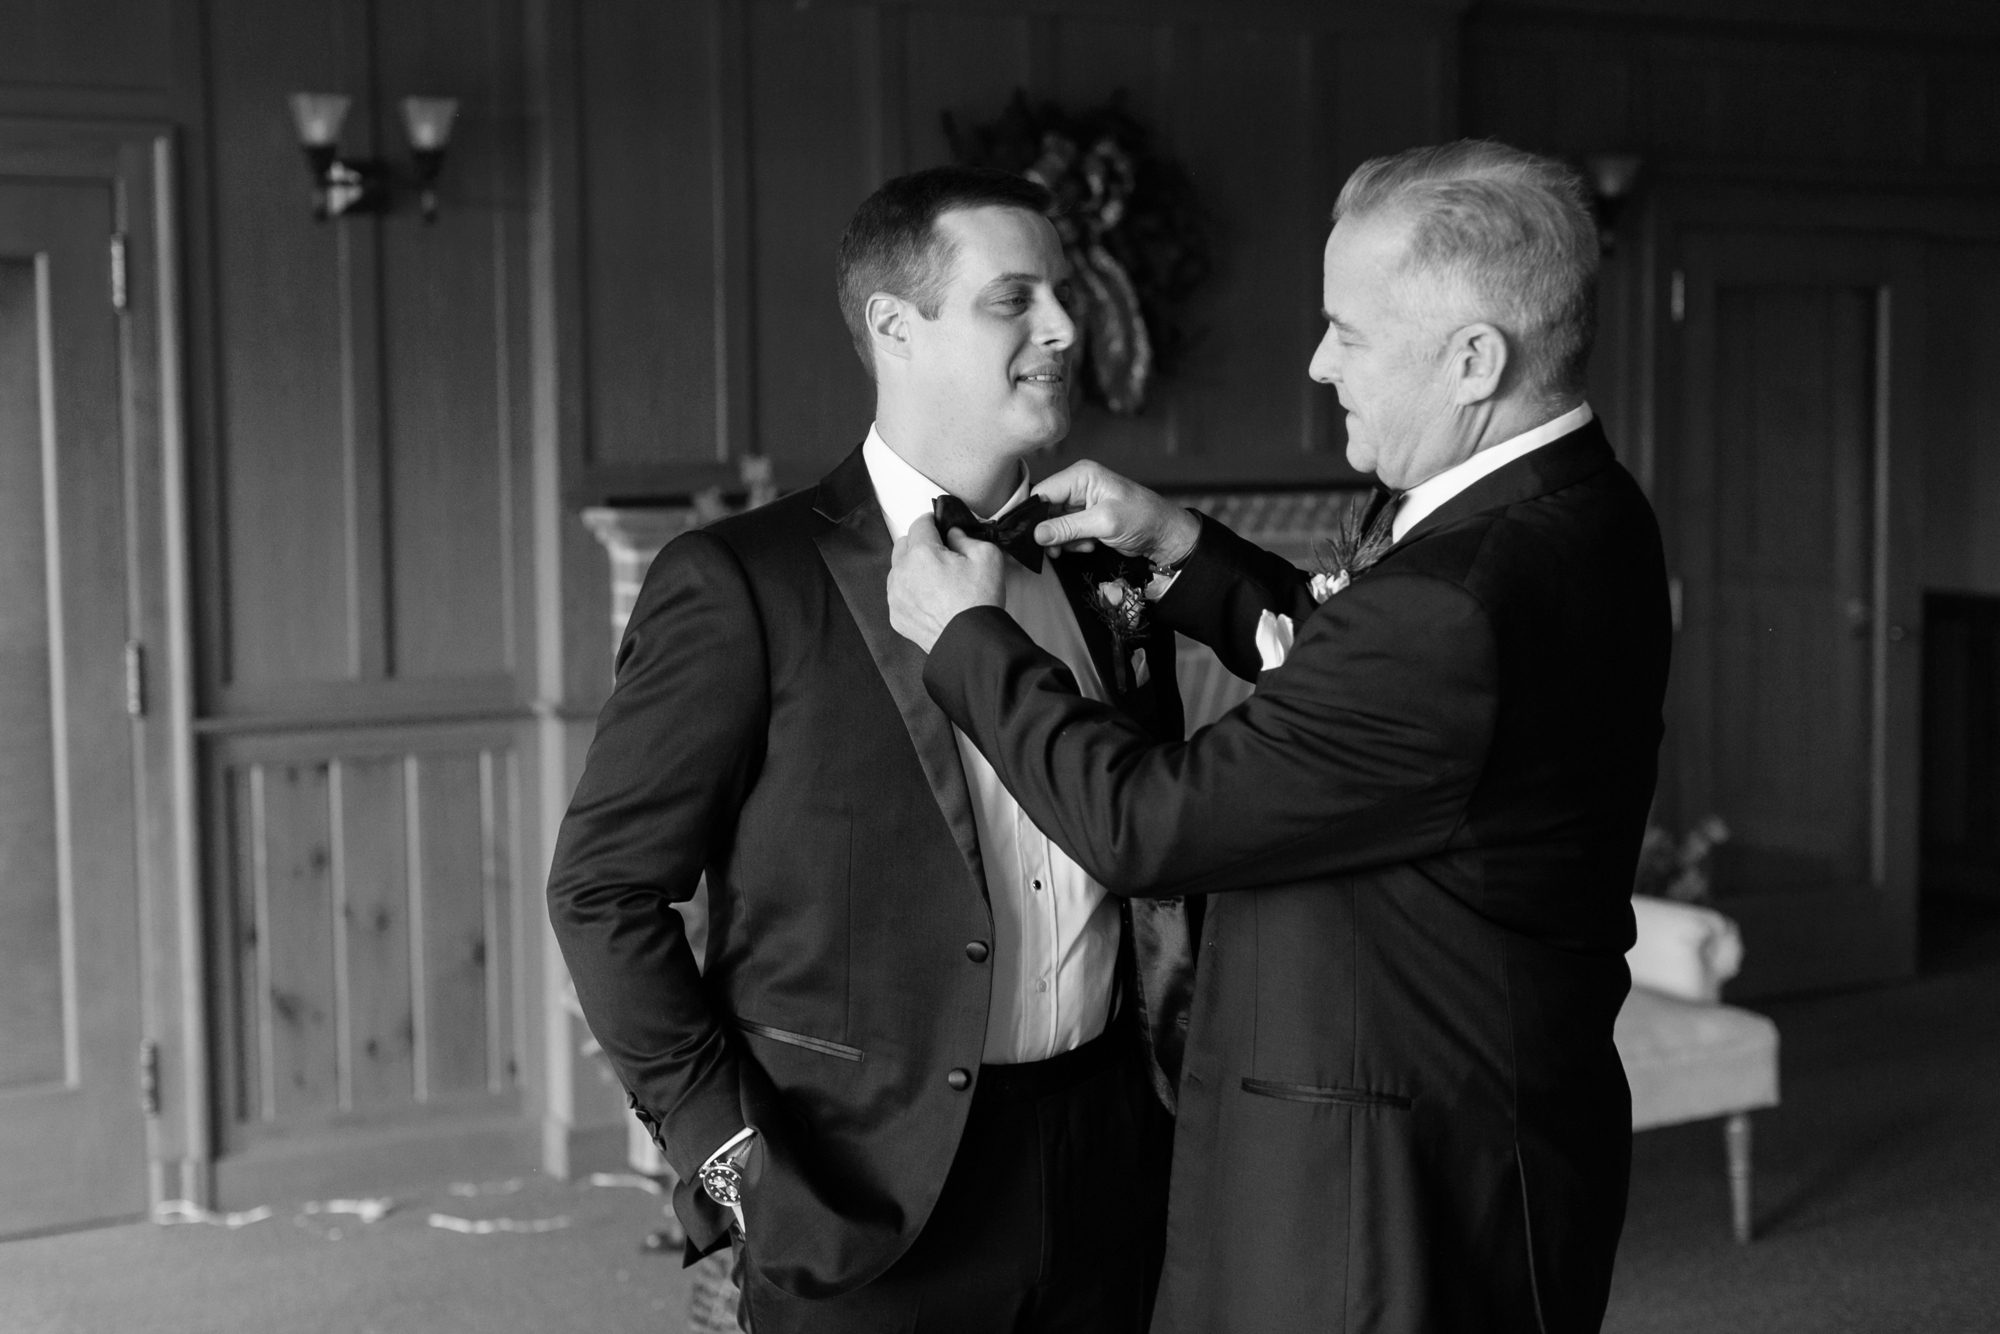 the groom got ready with the help of his dad